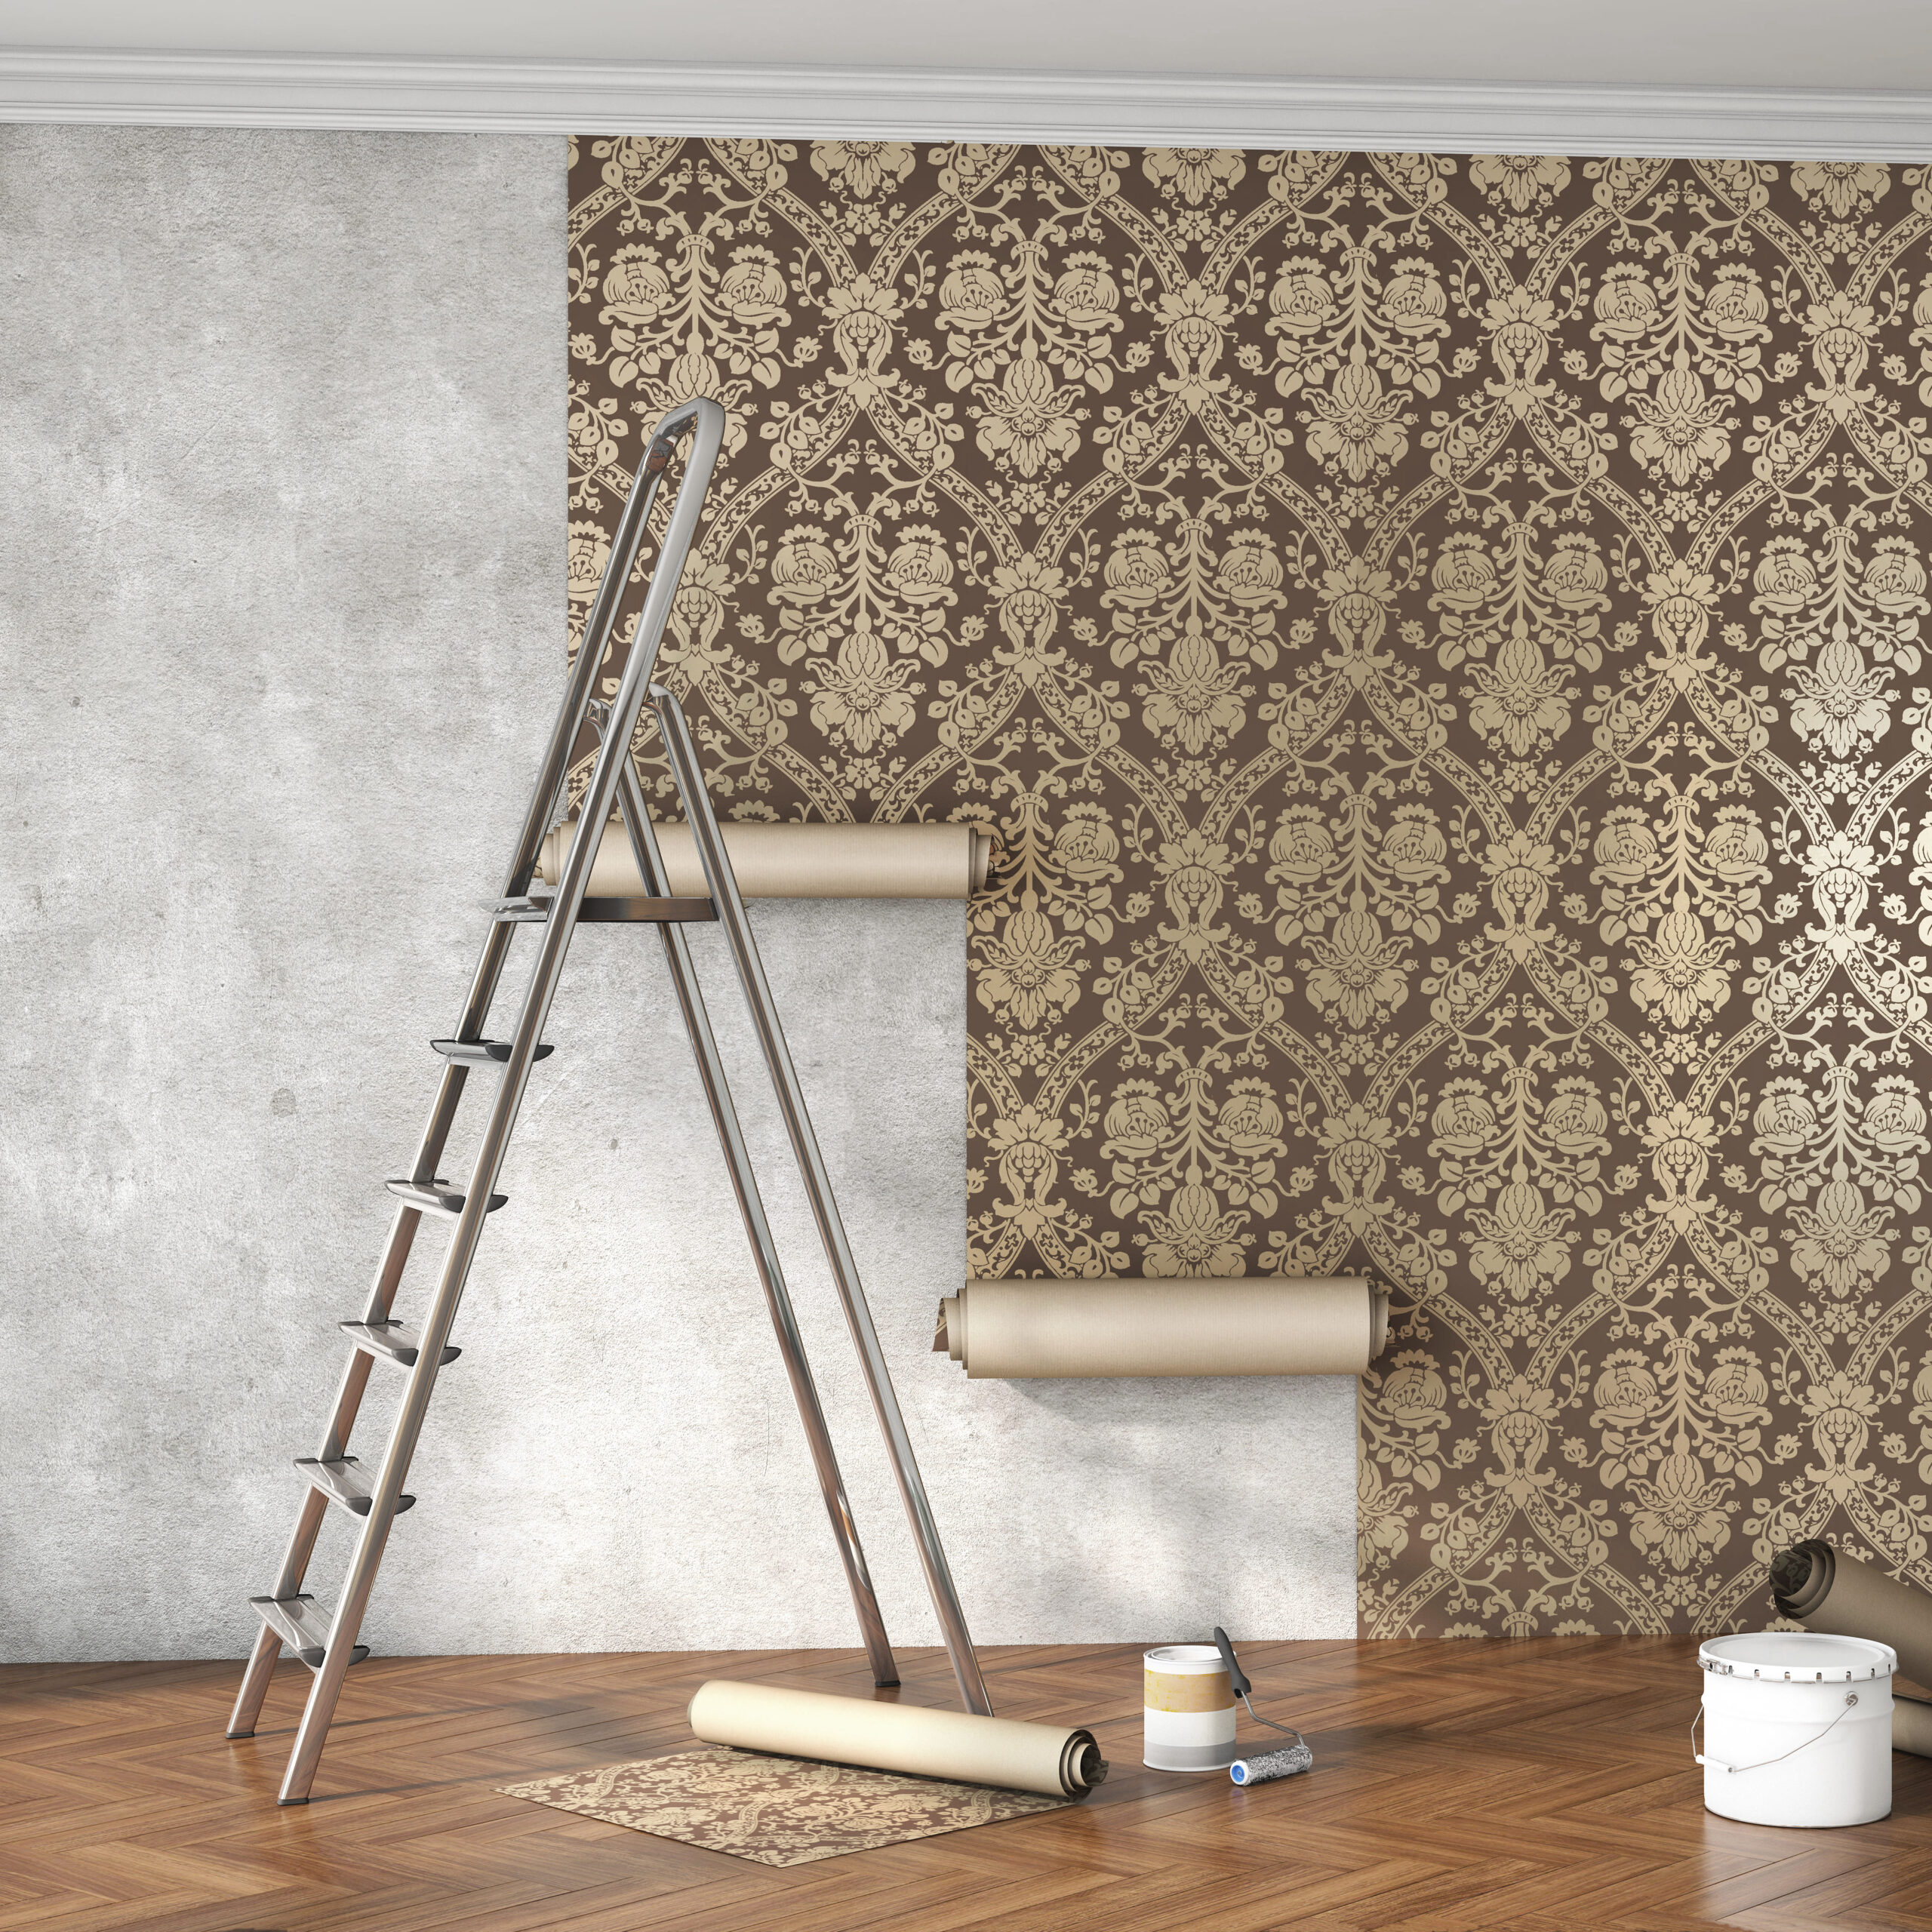 San Diego Painting and Wallpaper Installation  A Flores Painting